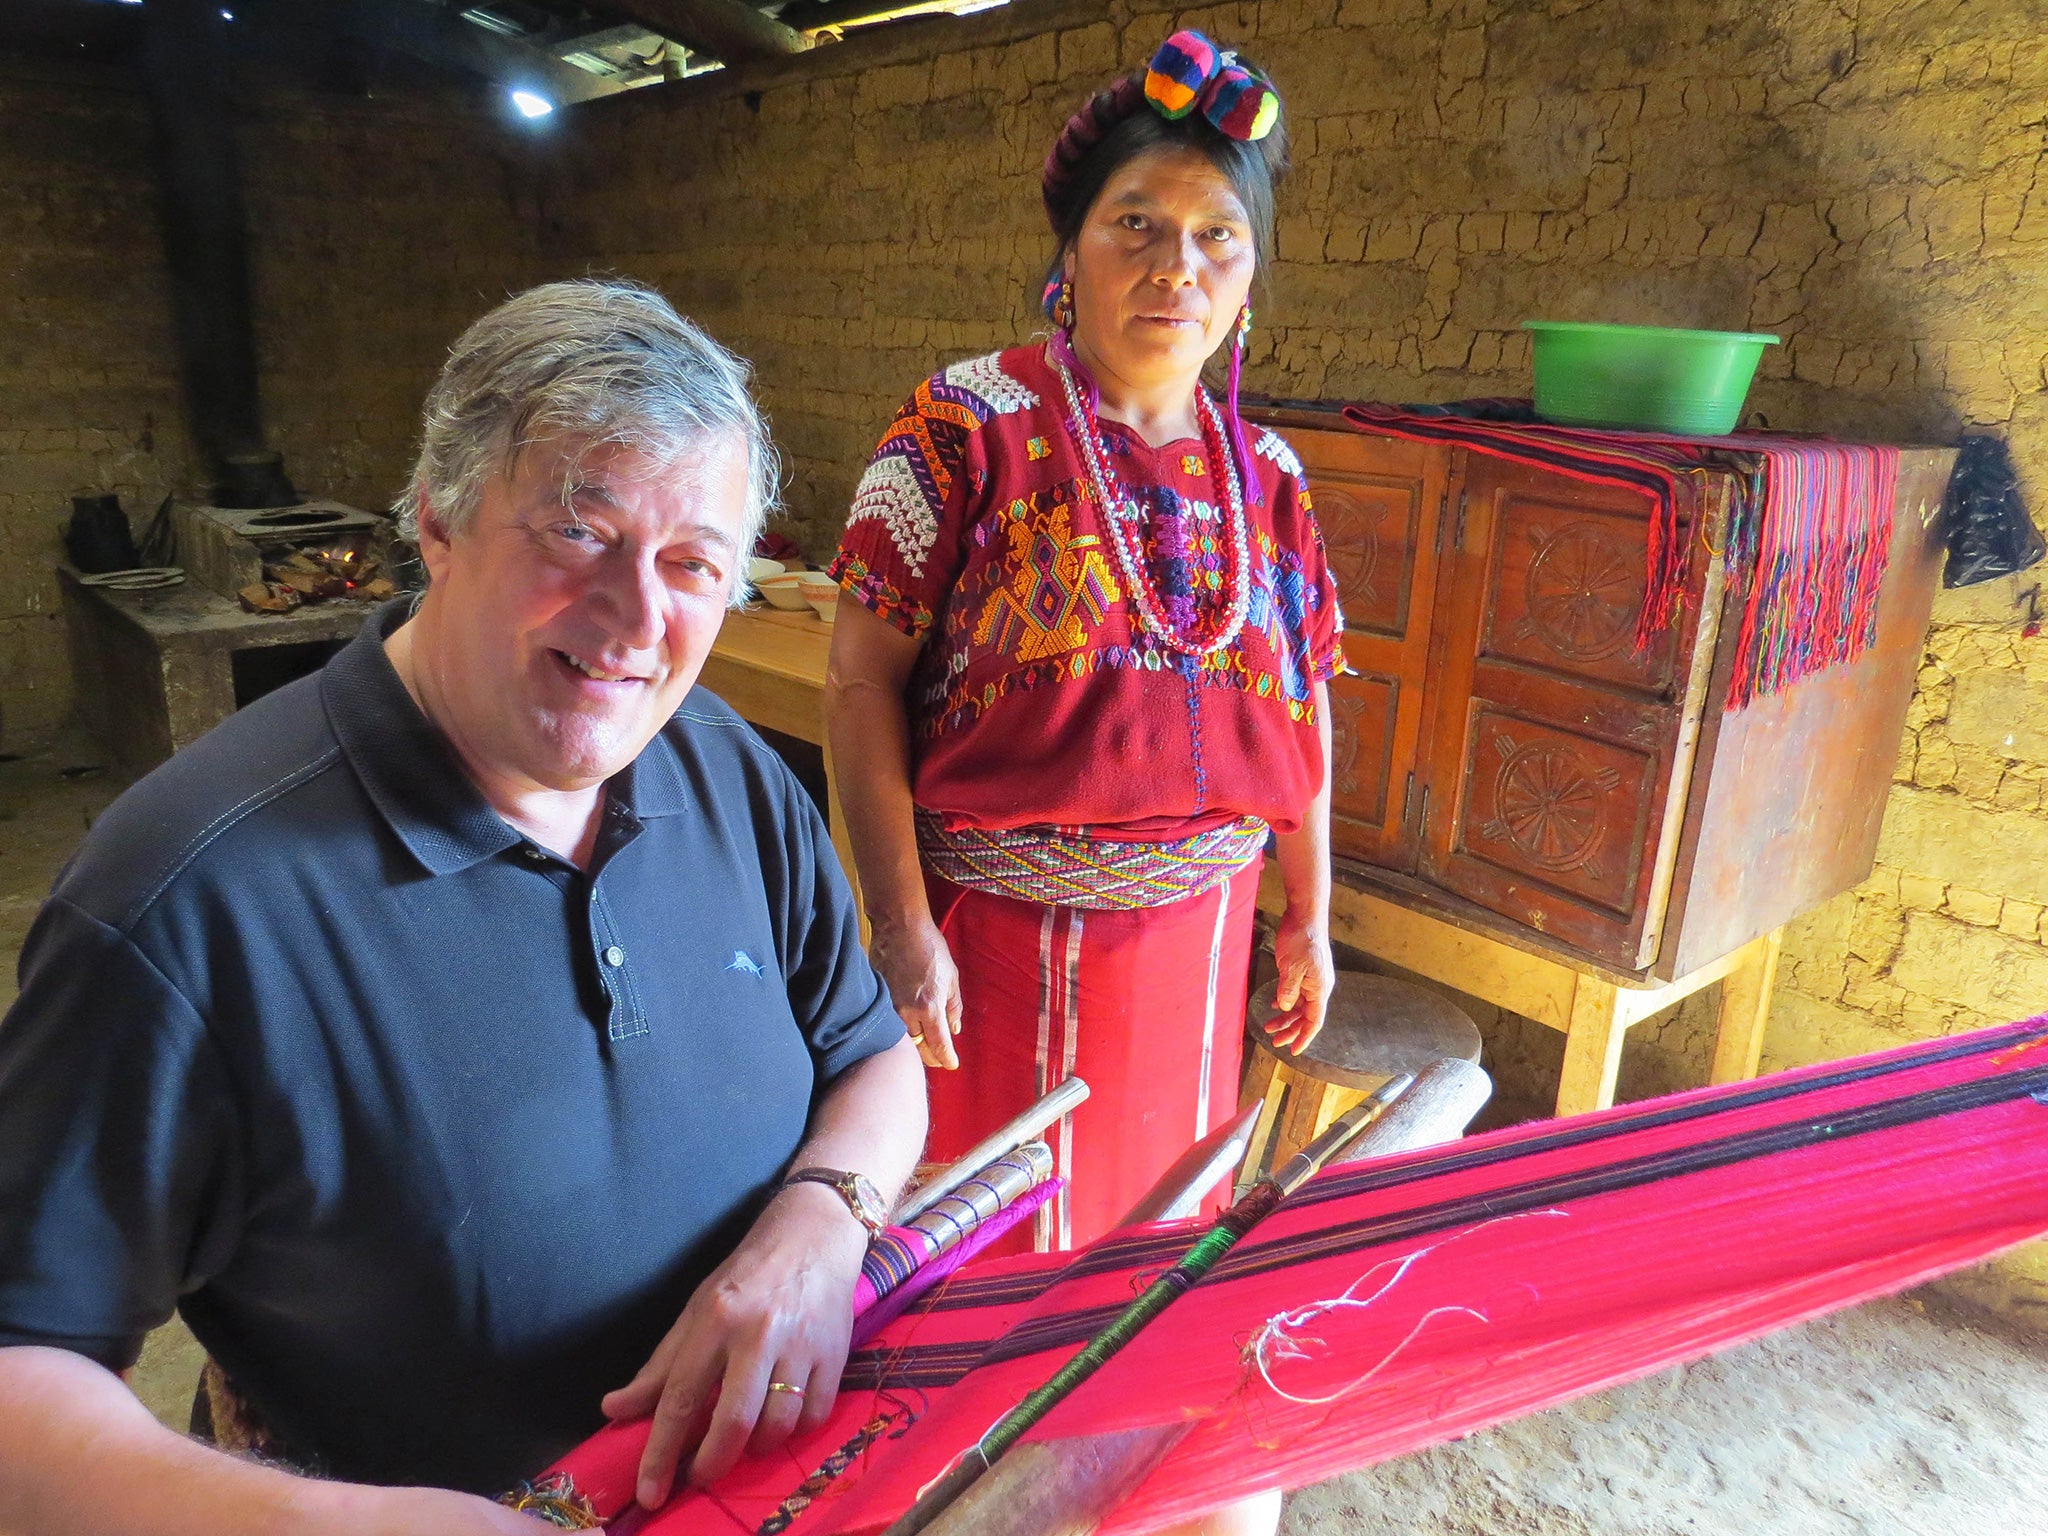 In stitches: Stephen Fry with weaver Catarina Caba in Chajul, Guatemala